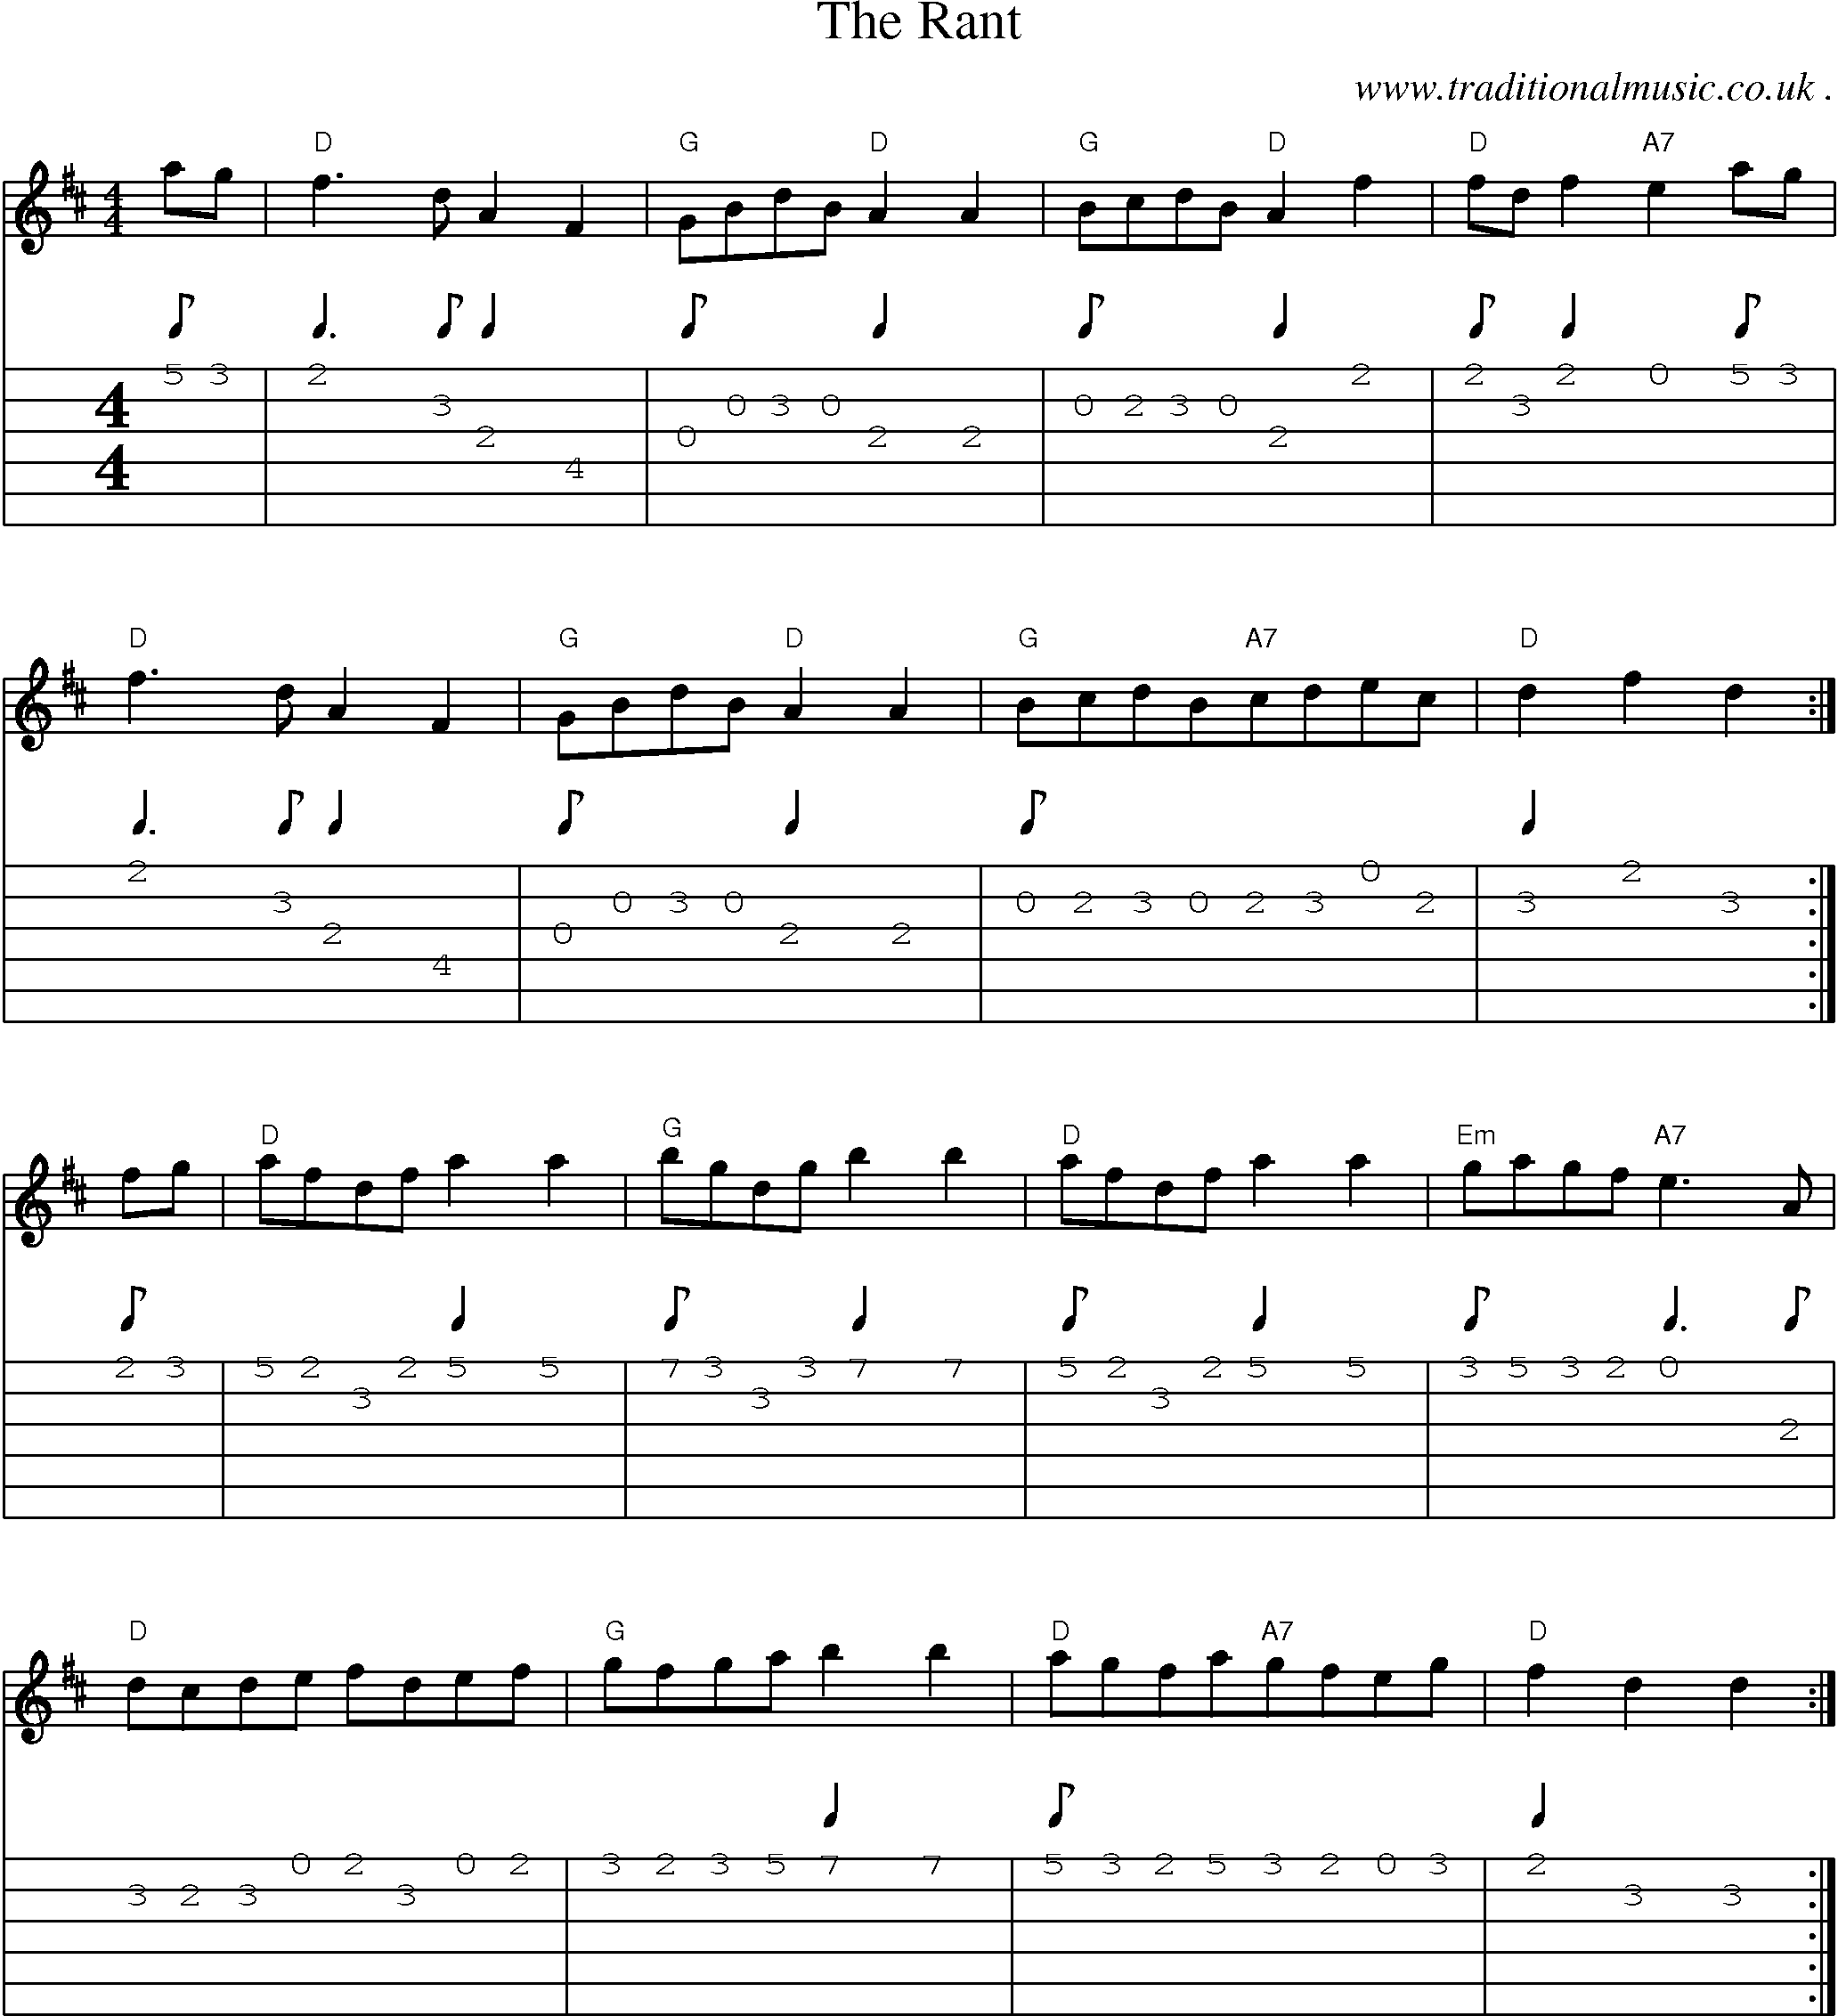 Sheet-Music and Guitar Tabs for The Rant